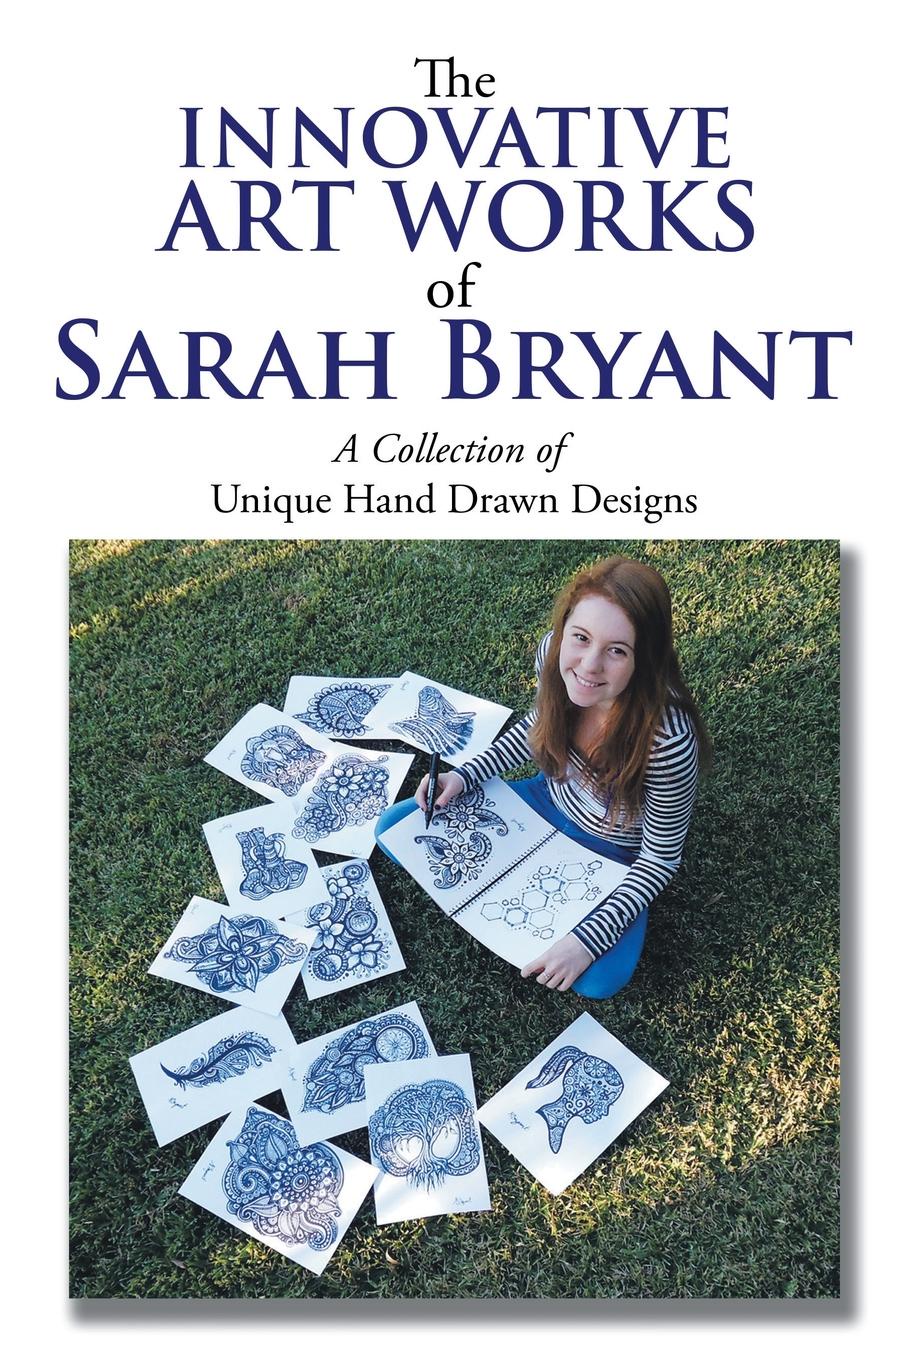 The Innovative Art Works of Sarah Bryant. A Collection of Unique Hand Drawn Designs